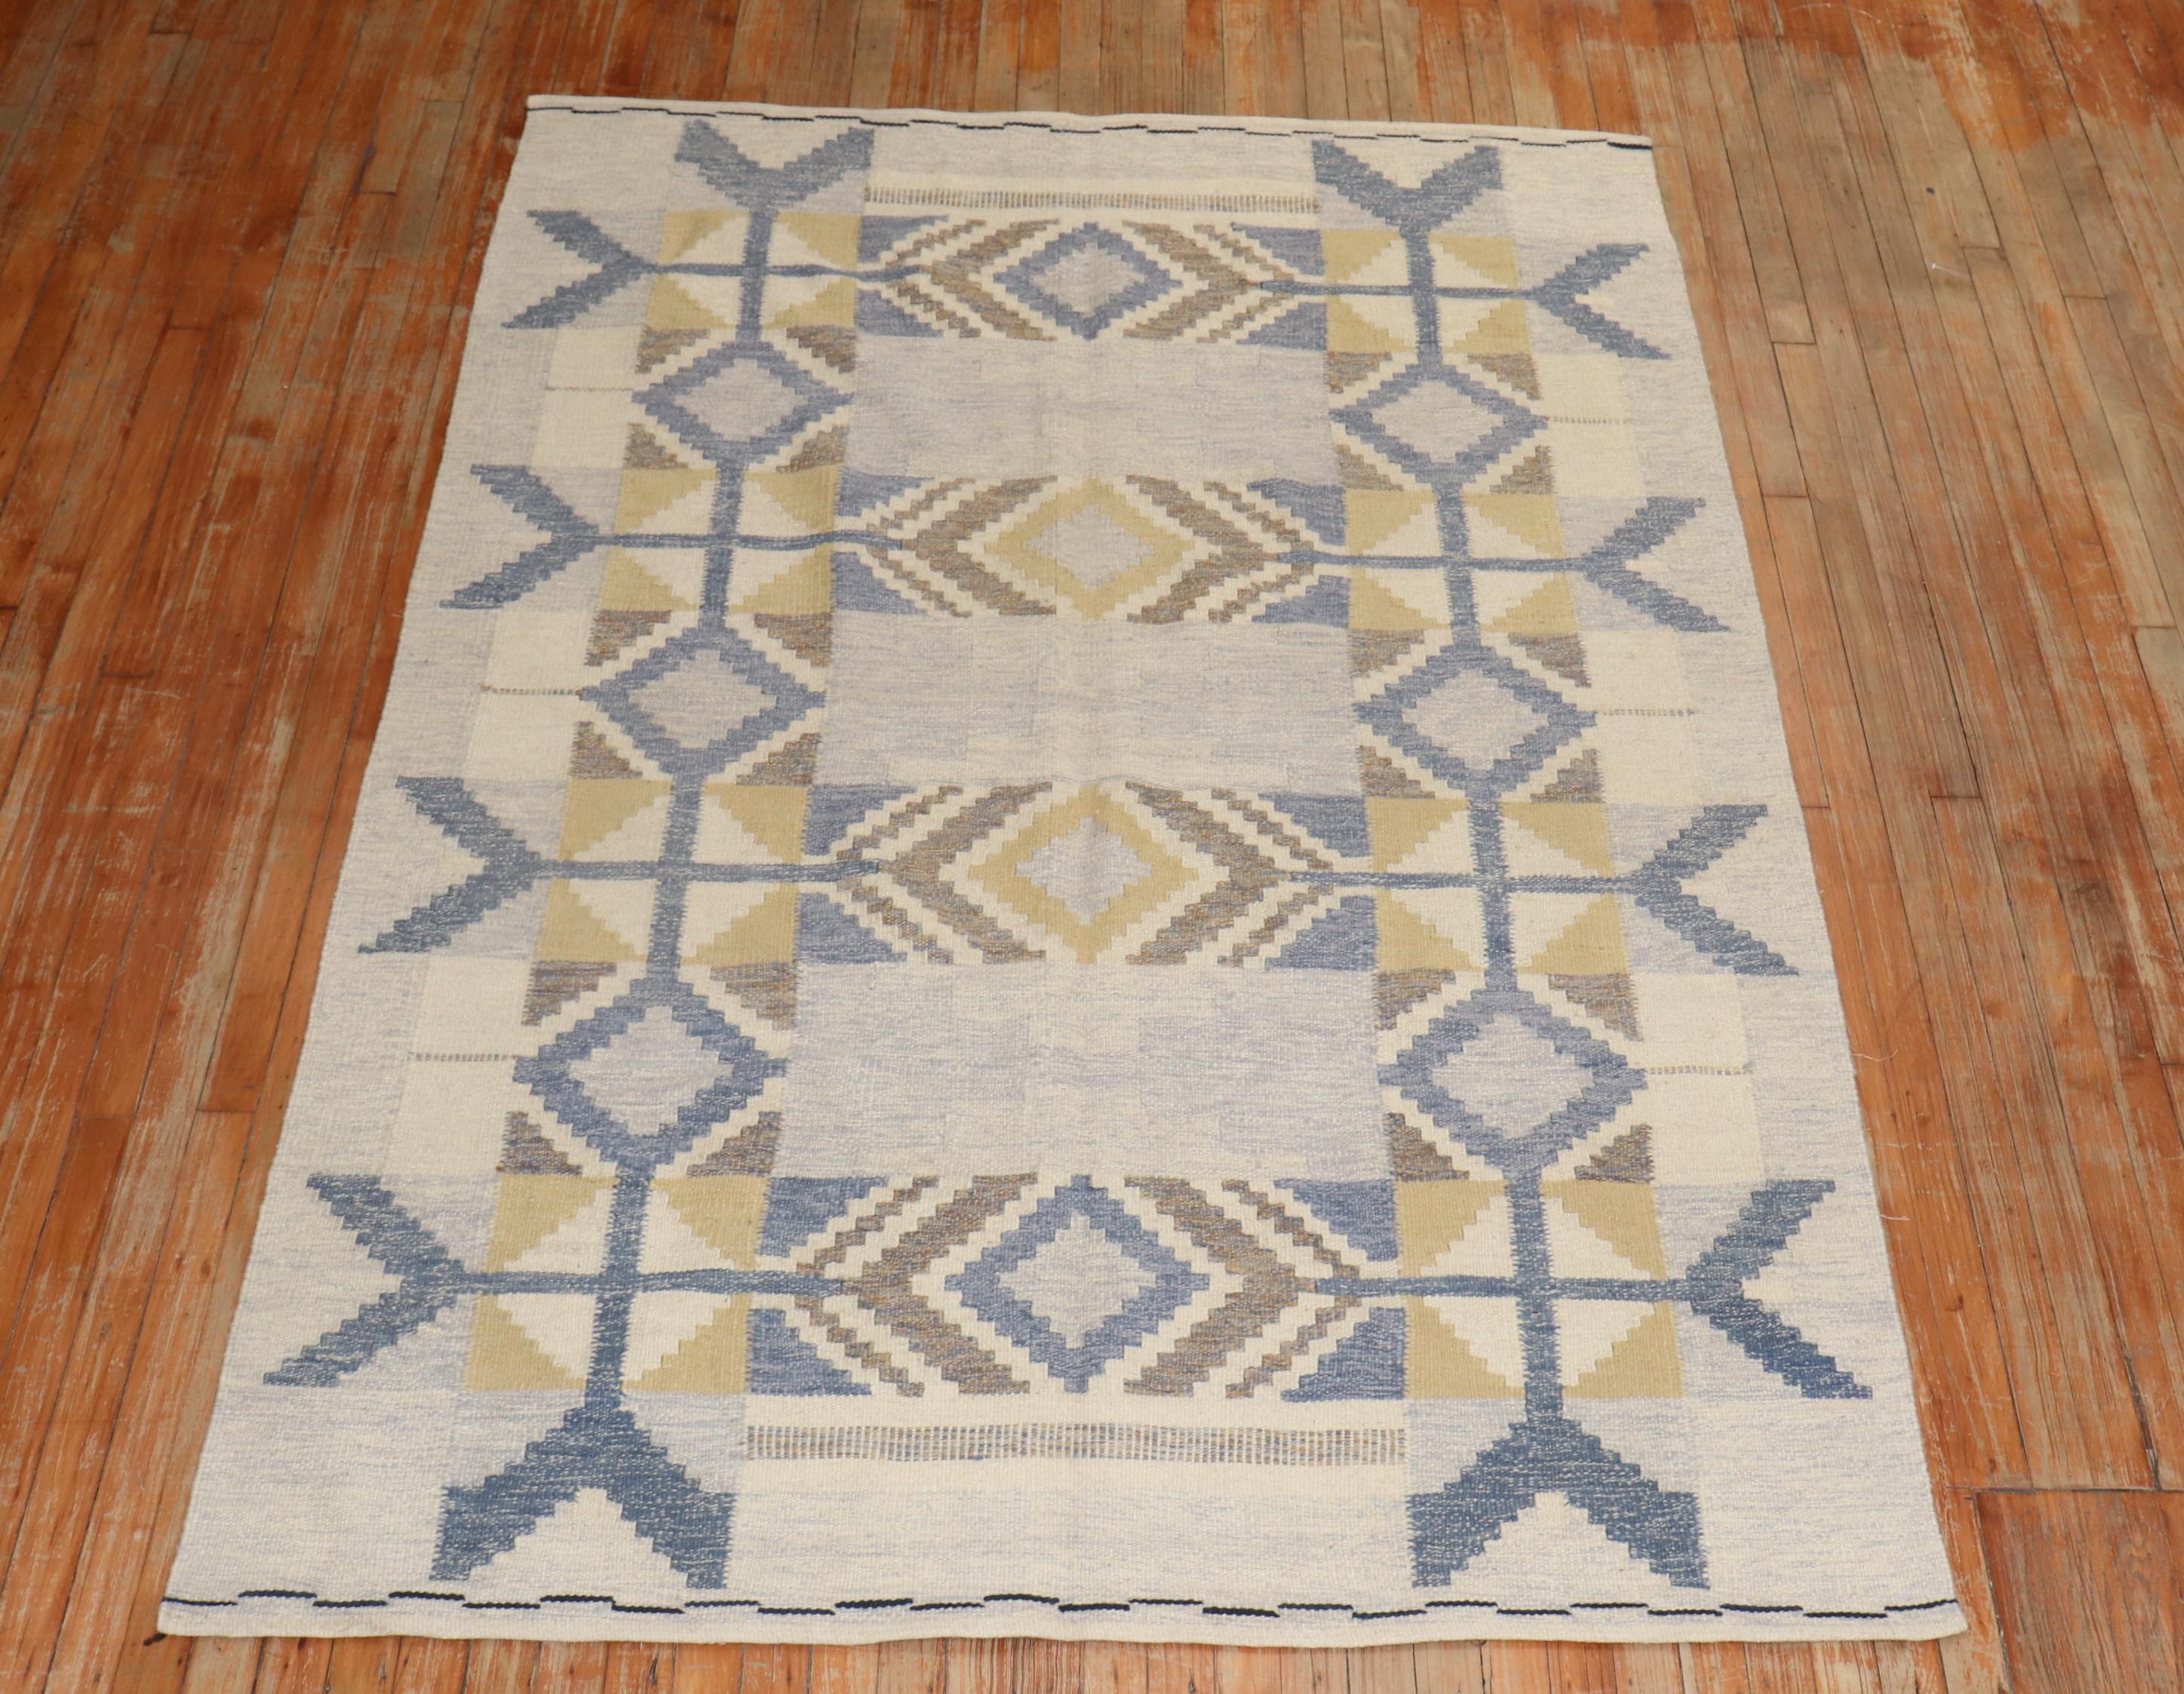 Abstract Swedish Kilim from the middle of the 20th Century

Measures: 5'2'' x 7'10